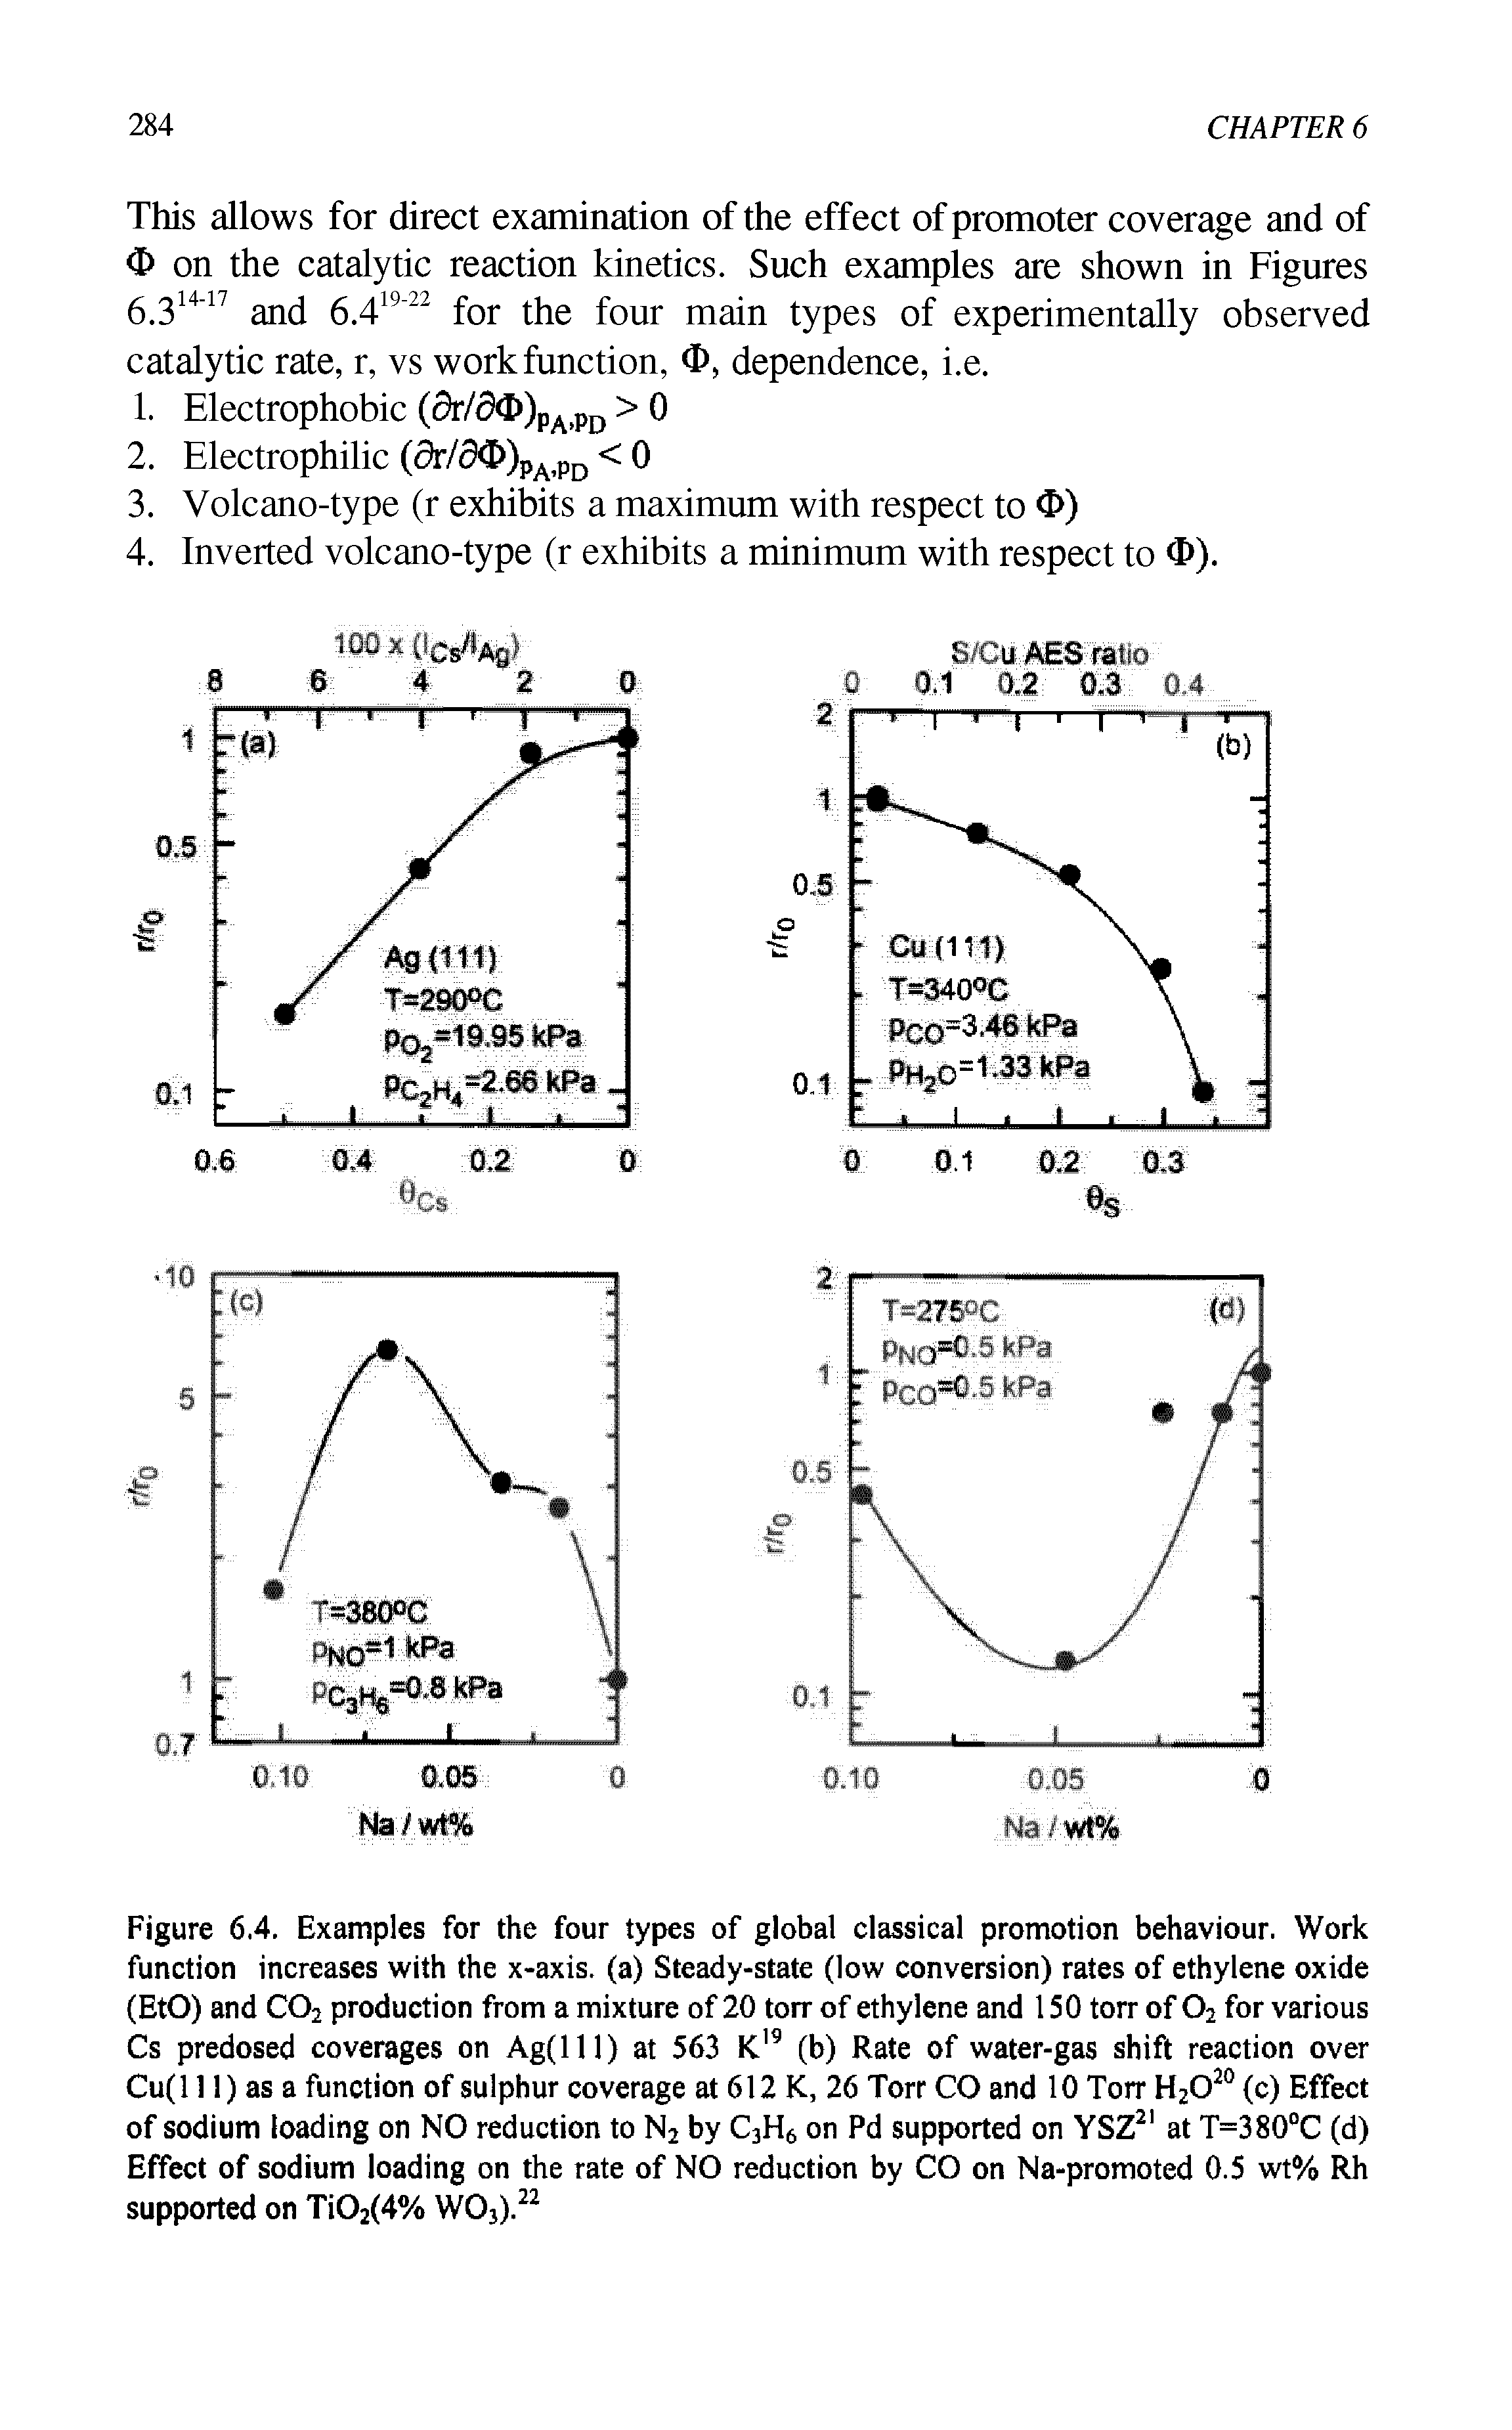 Figure 6.4. Examples for the four types of global classical promotion behaviour. Work function increases with the x-axis. (a) Steady-state (low conversion) rates of ethylene oxide (EtO) and C02 production from a mixture of 20 torr of ethylene and 150 torr of 02 for various Cs predosed coverages on Ag(lll) at 563 K19 (b) Rate of water-gas shift reaction over Cu(l 11) as a function of sulphur coverage at 612 K, 26 Torr CO and 10 Torr H202° (c) Effect of sodium loading on NO reduction to N2 by C3H6 on Pd supported on YSZ21 at T=380°C (d) Effect of sodium loading on the rate of NO reduction by CO on Na-promoted 0.5 wt% Rh supported on Ti02(4% W03).22...